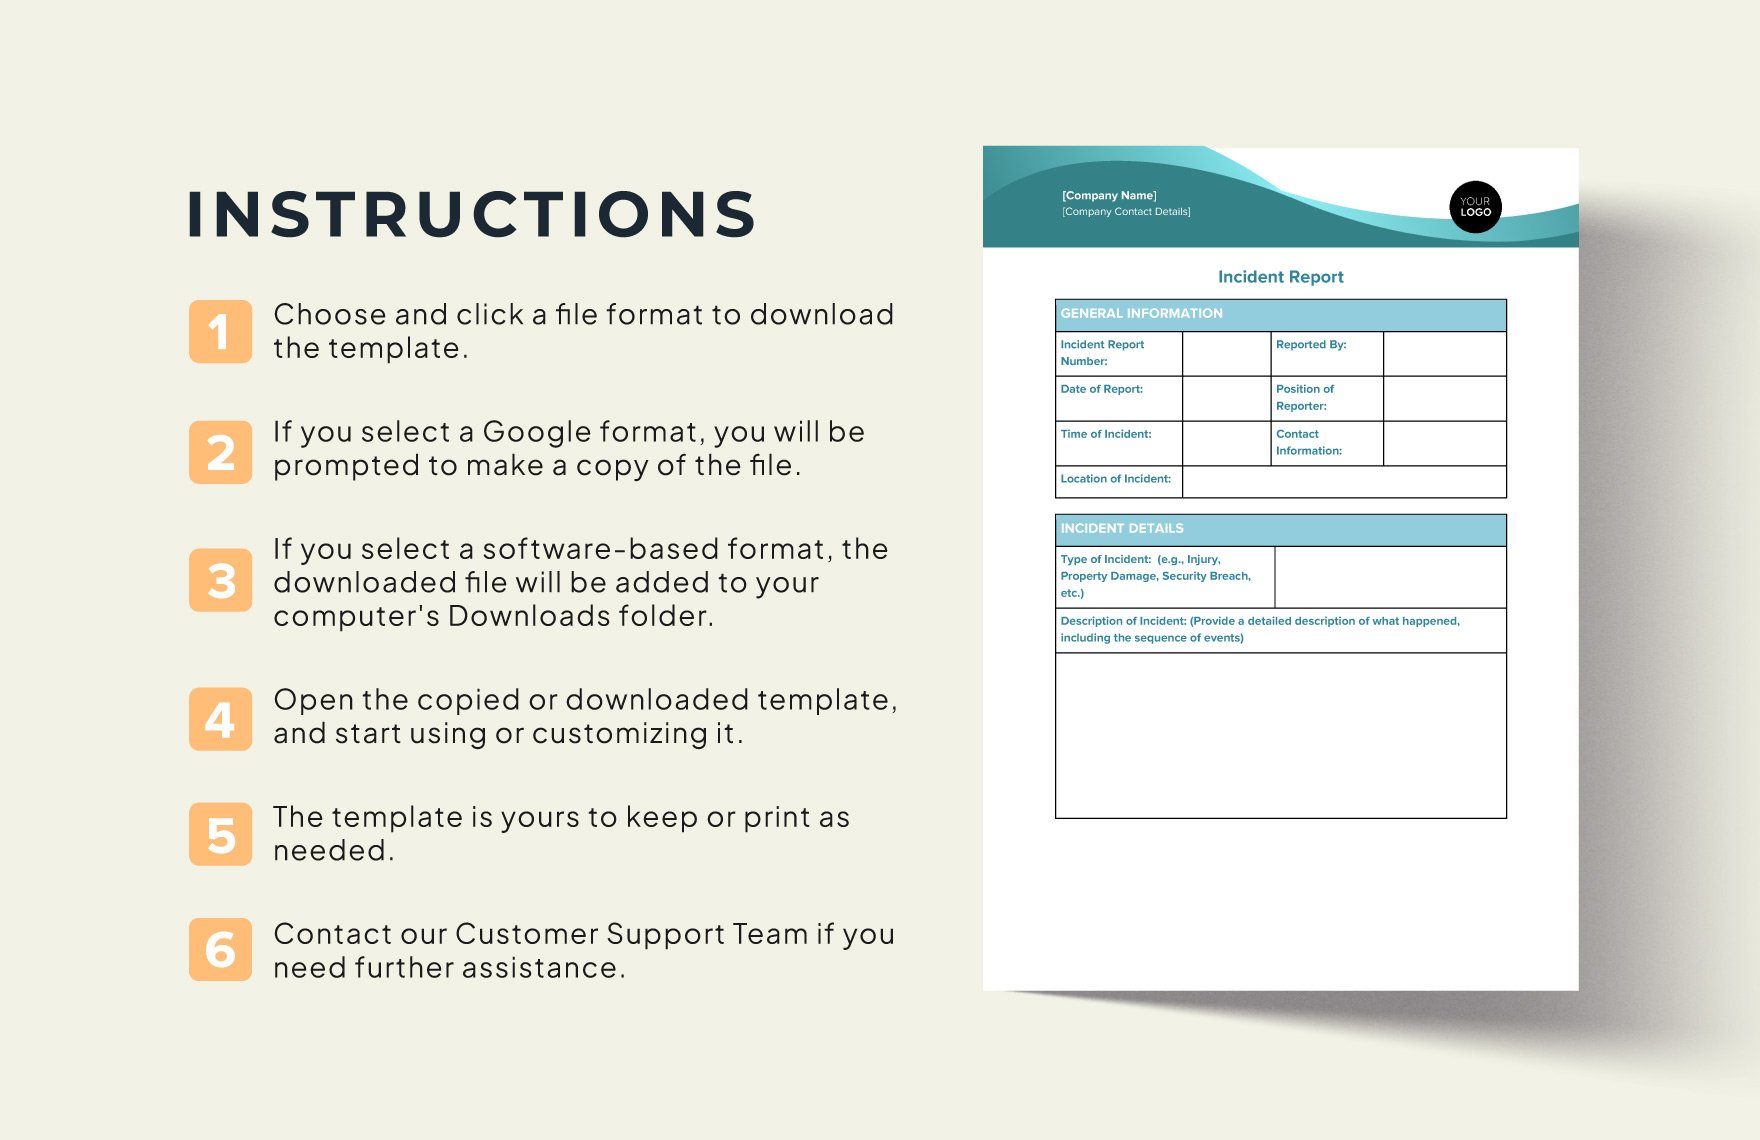 Fillable Incident Report Template